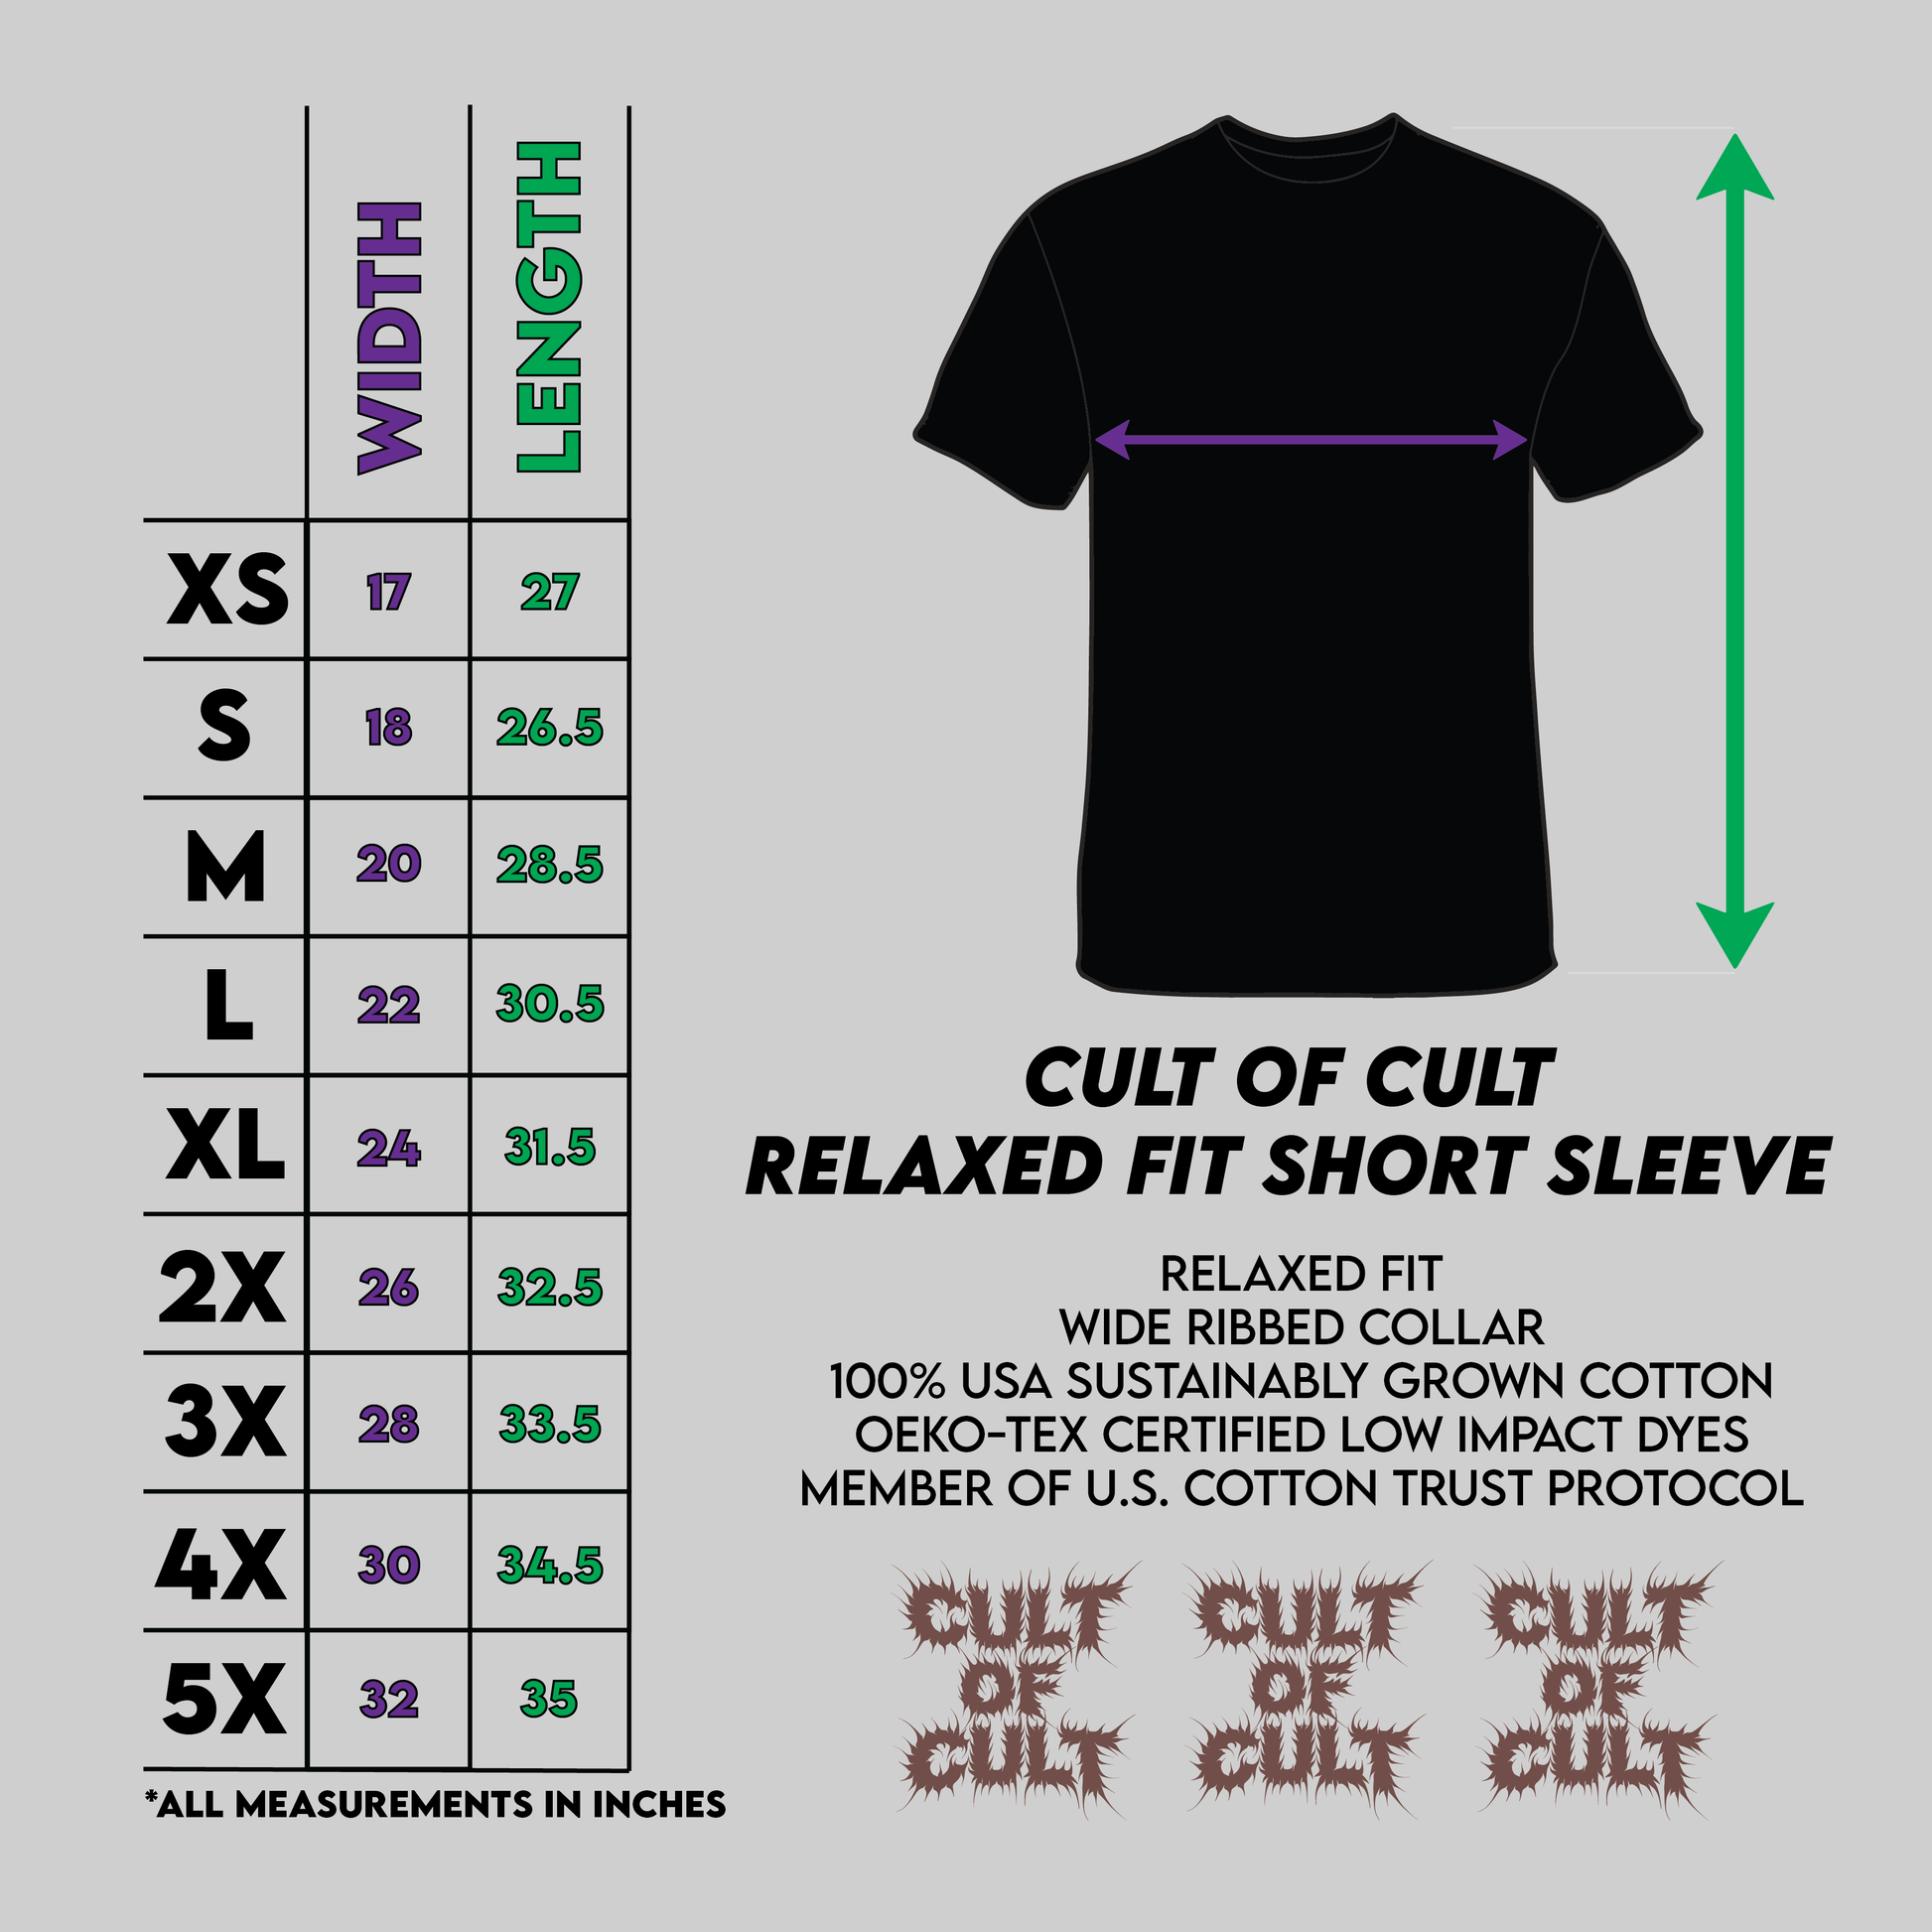 Cult of Cult sizing chart for short sleeve shirts